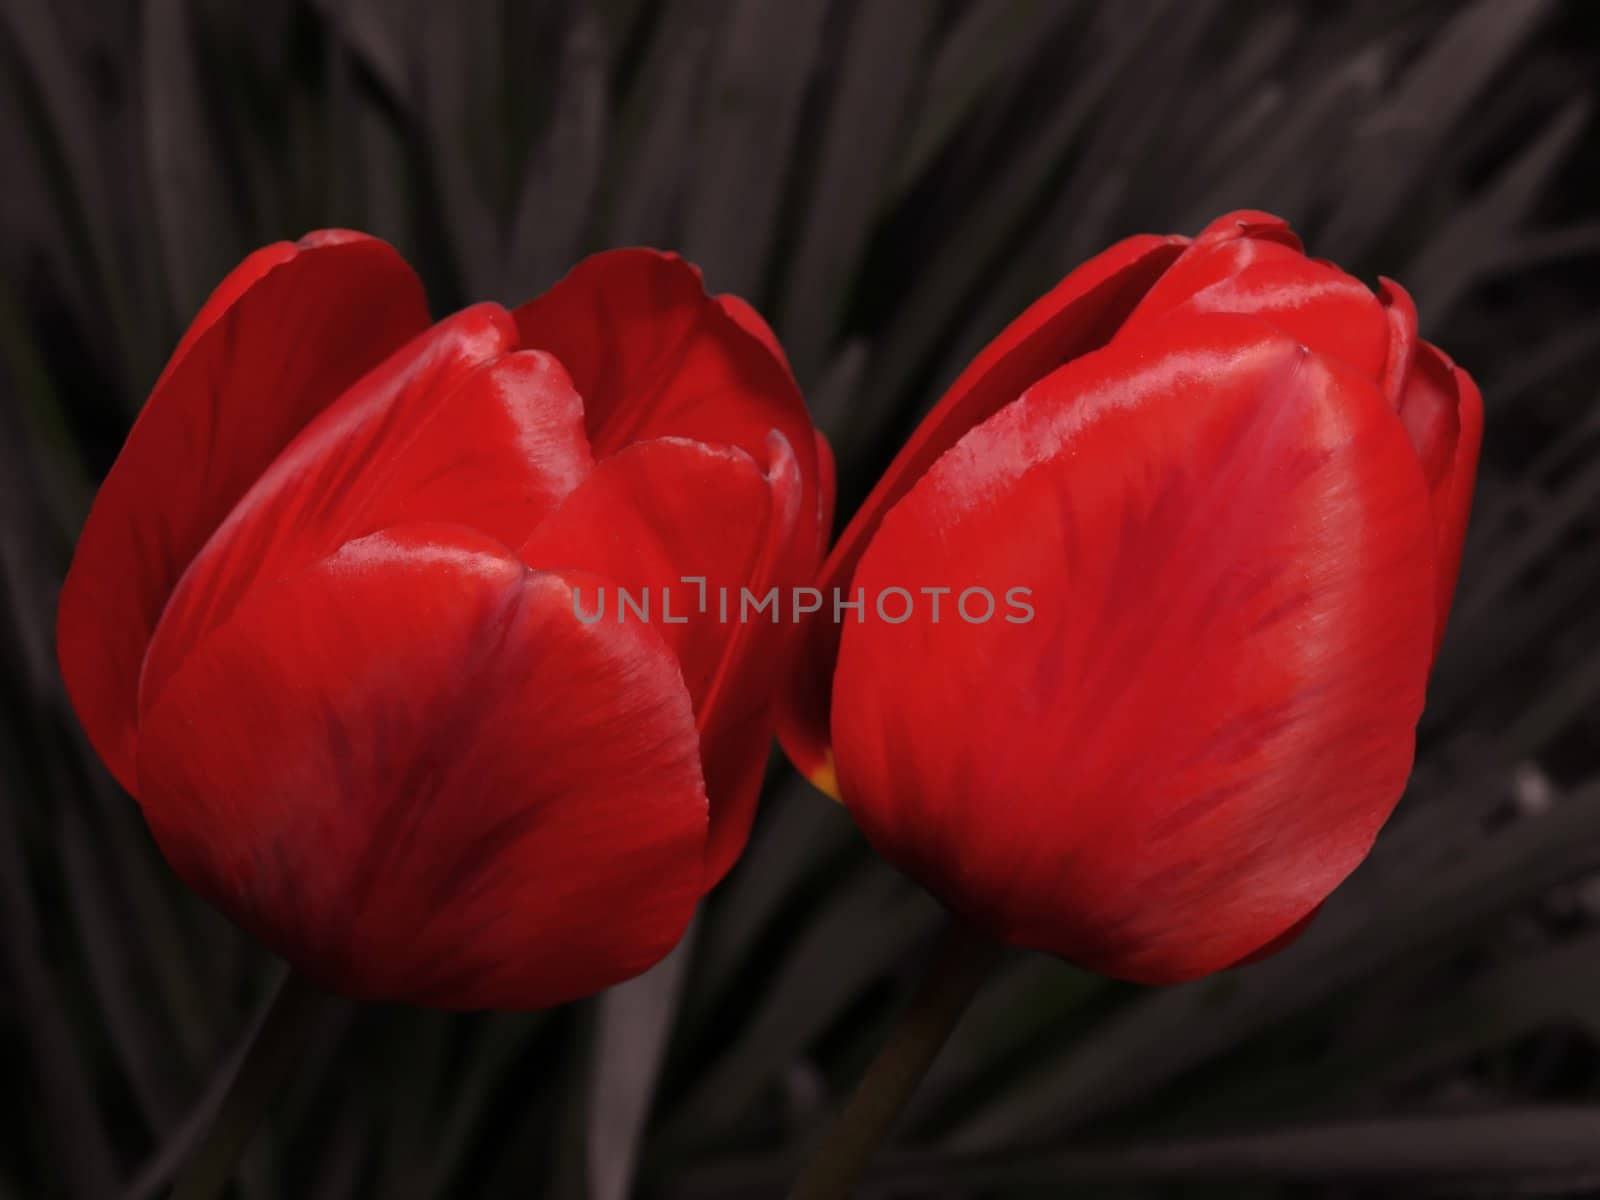 Two tulips on desaturated background.